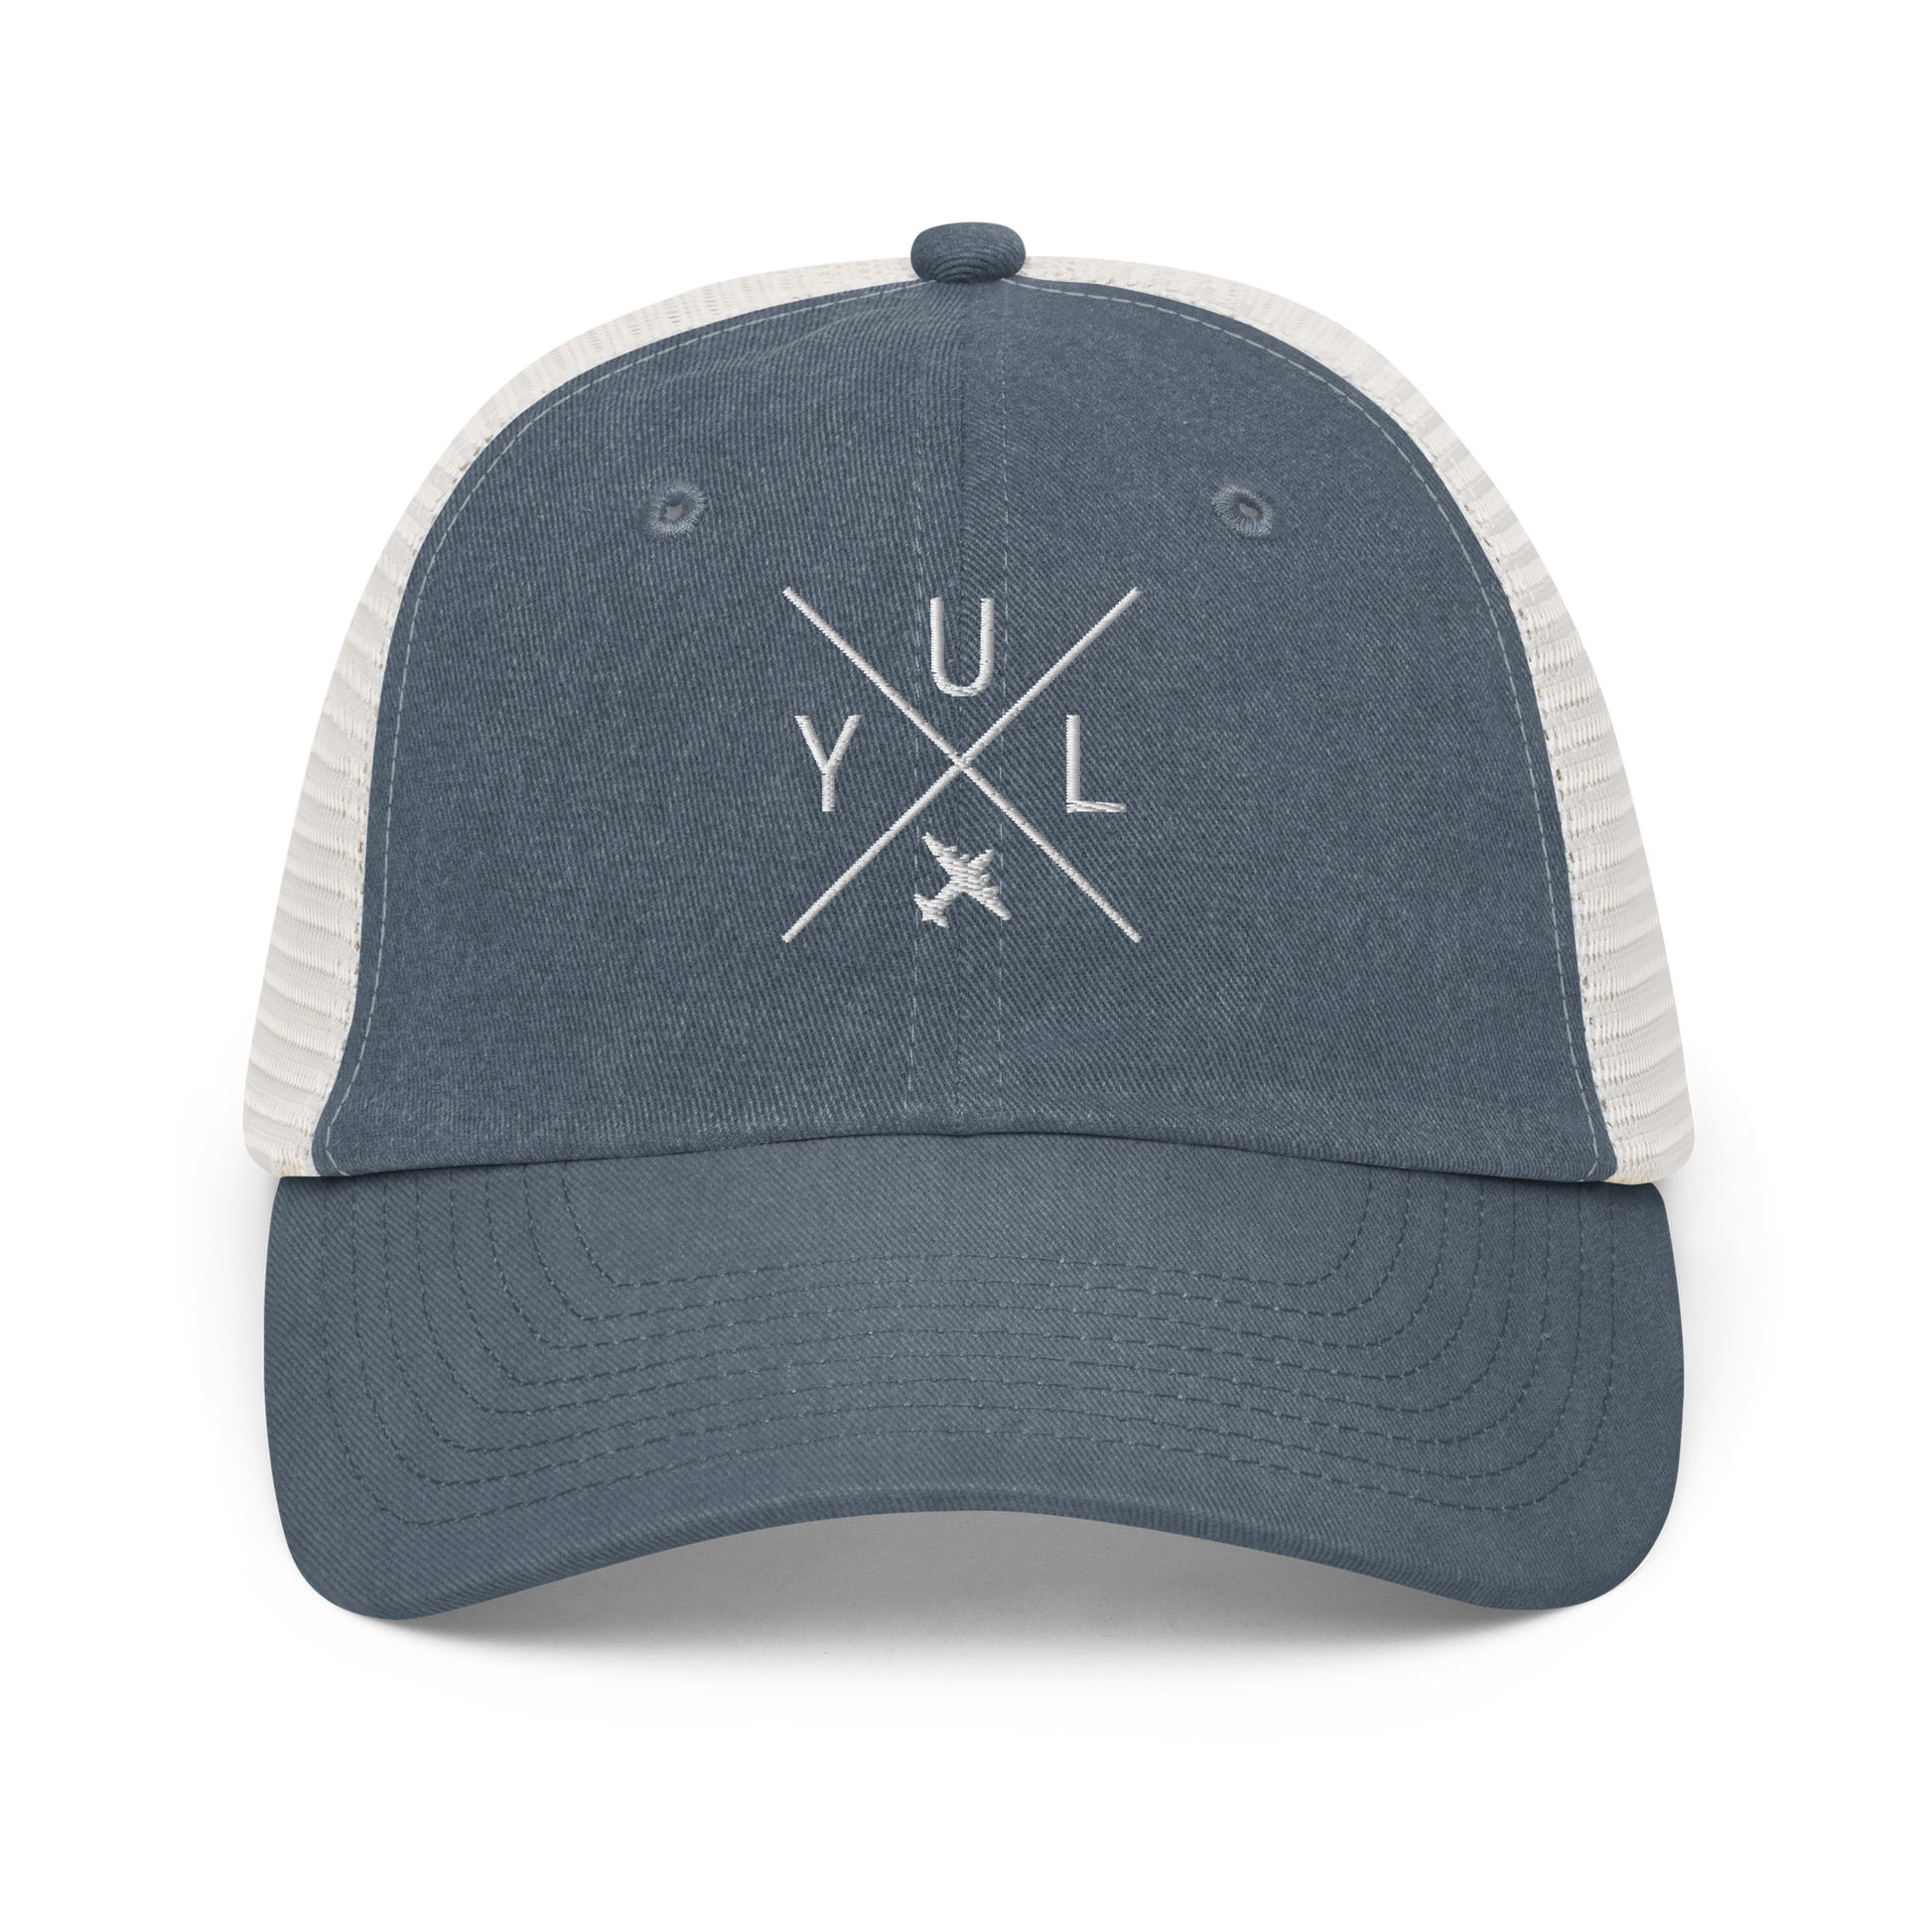 YHM Designs - YUL Montreal Pigment-Dyed Trucker Cap - Crossed-X Design with Airport Code and Vintage Propliner - White Embroidery - Image 06